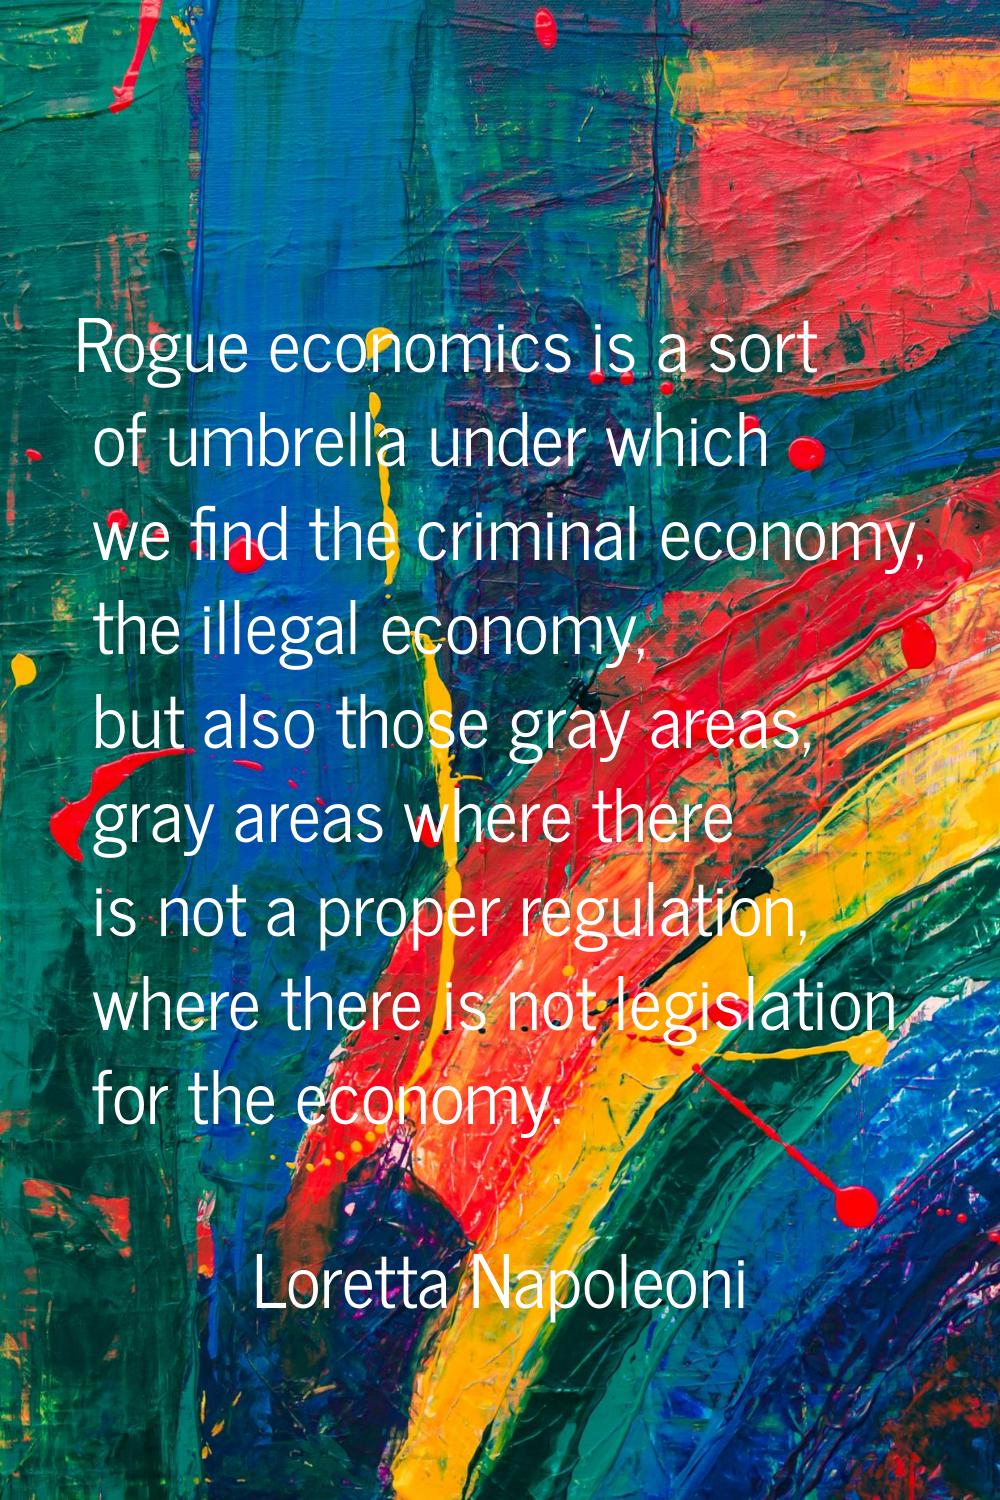 Rogue economics is a sort of umbrella under which we find the criminal economy, the illegal economy